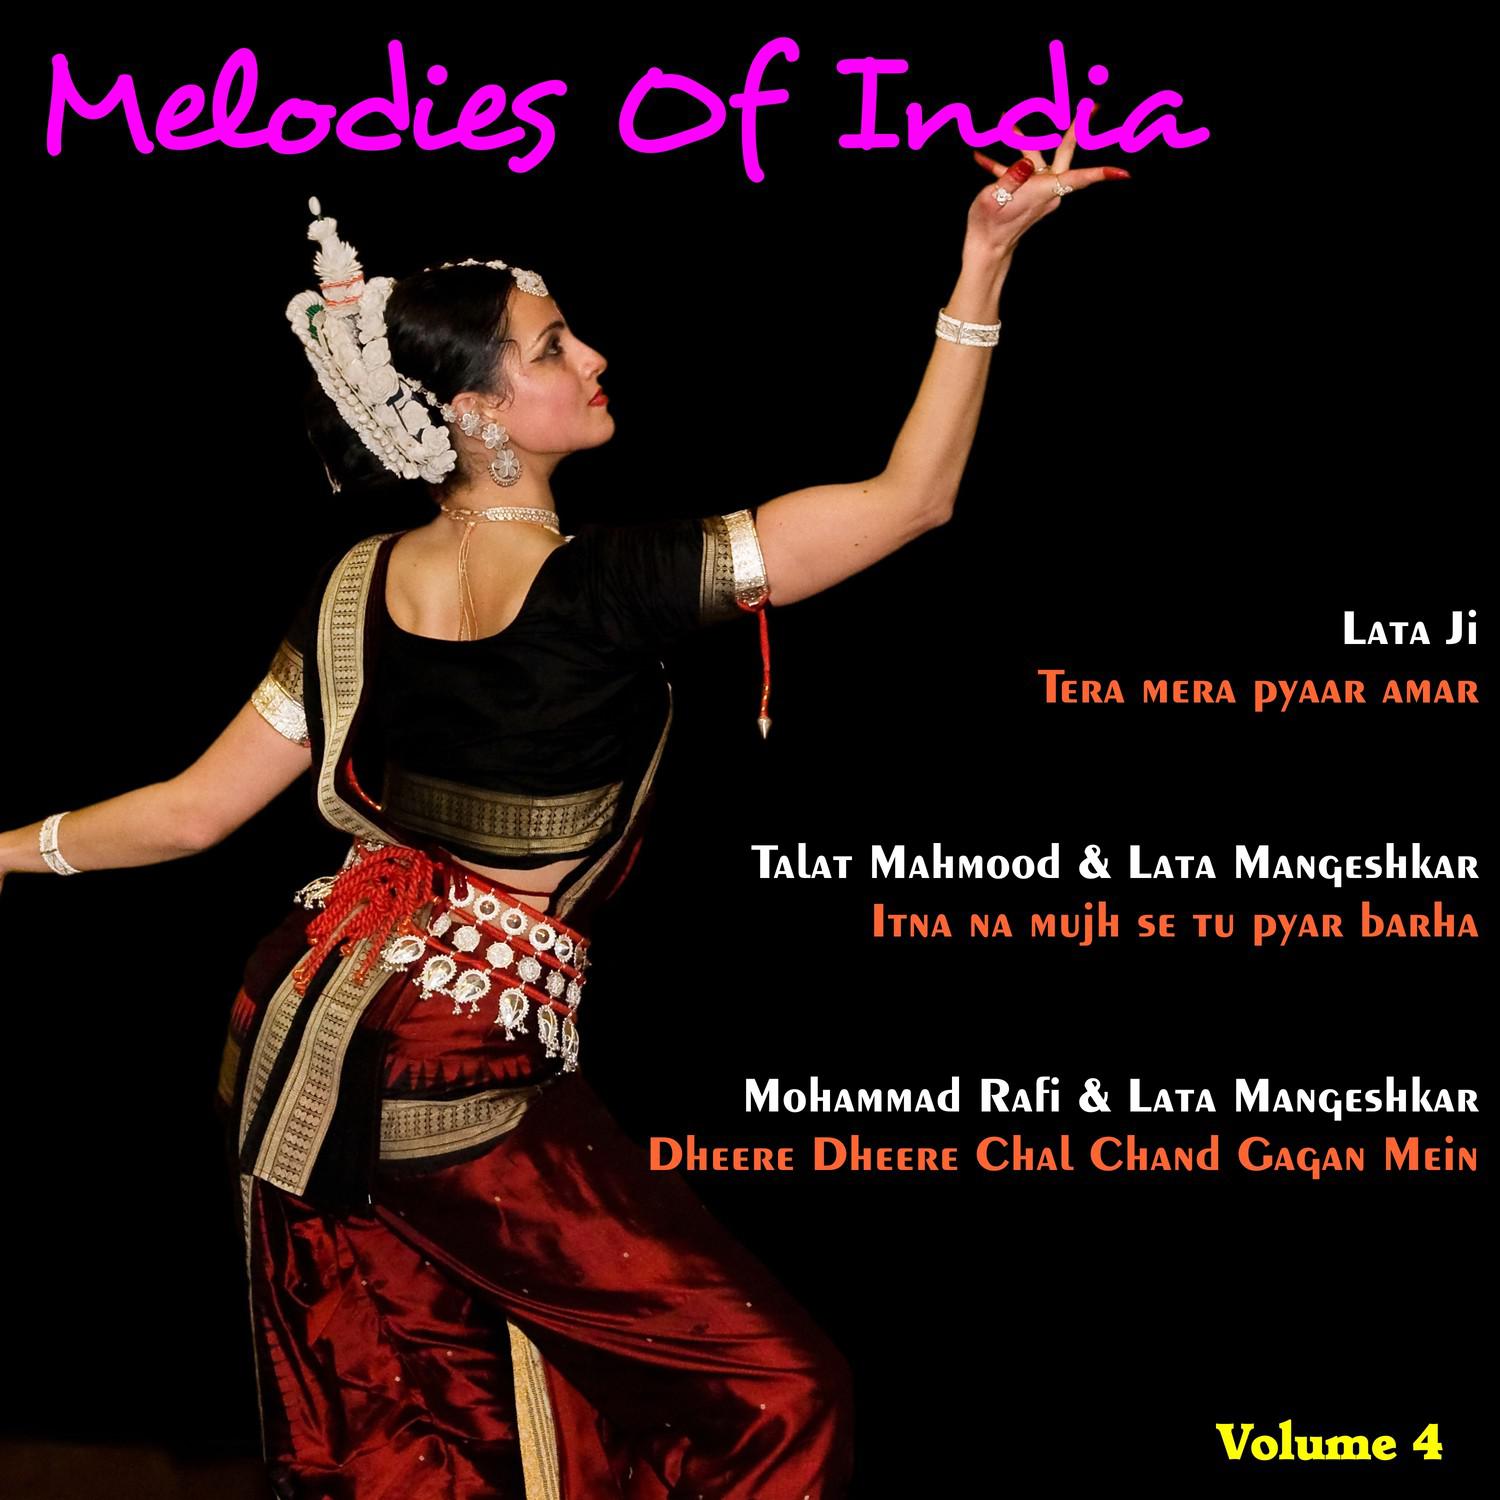 Melodies of India, Vol. 4